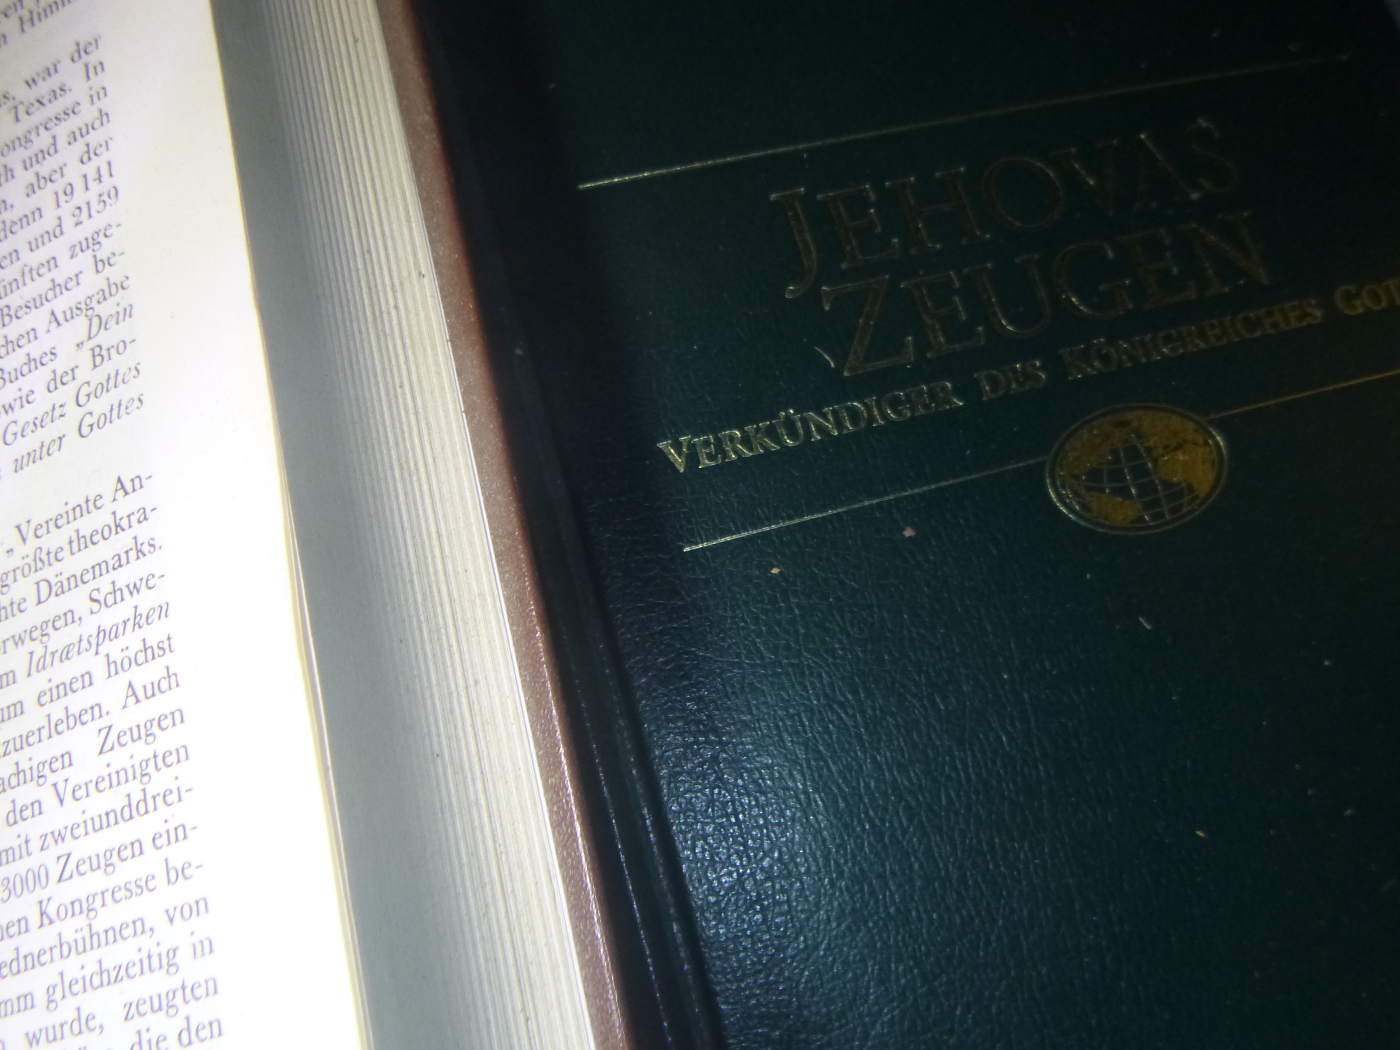 The pointless salvation of Jehovah's Witnesses